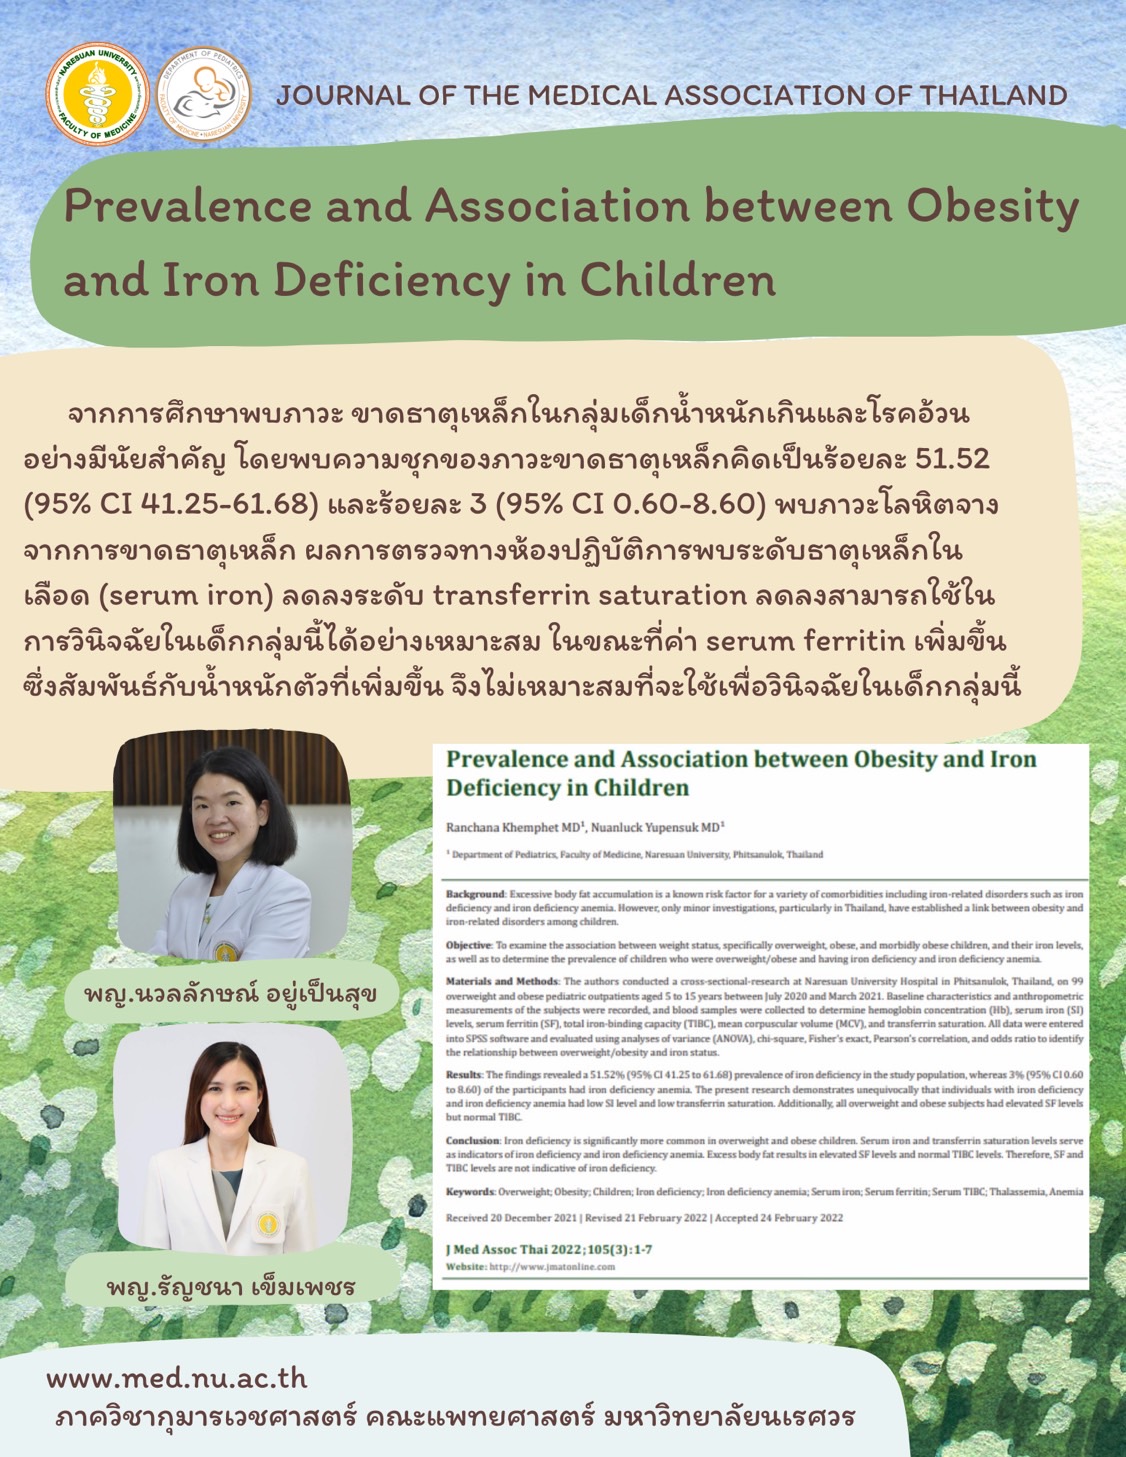 -Prevalence and Association between Obesity and Iron Deficiency in Children